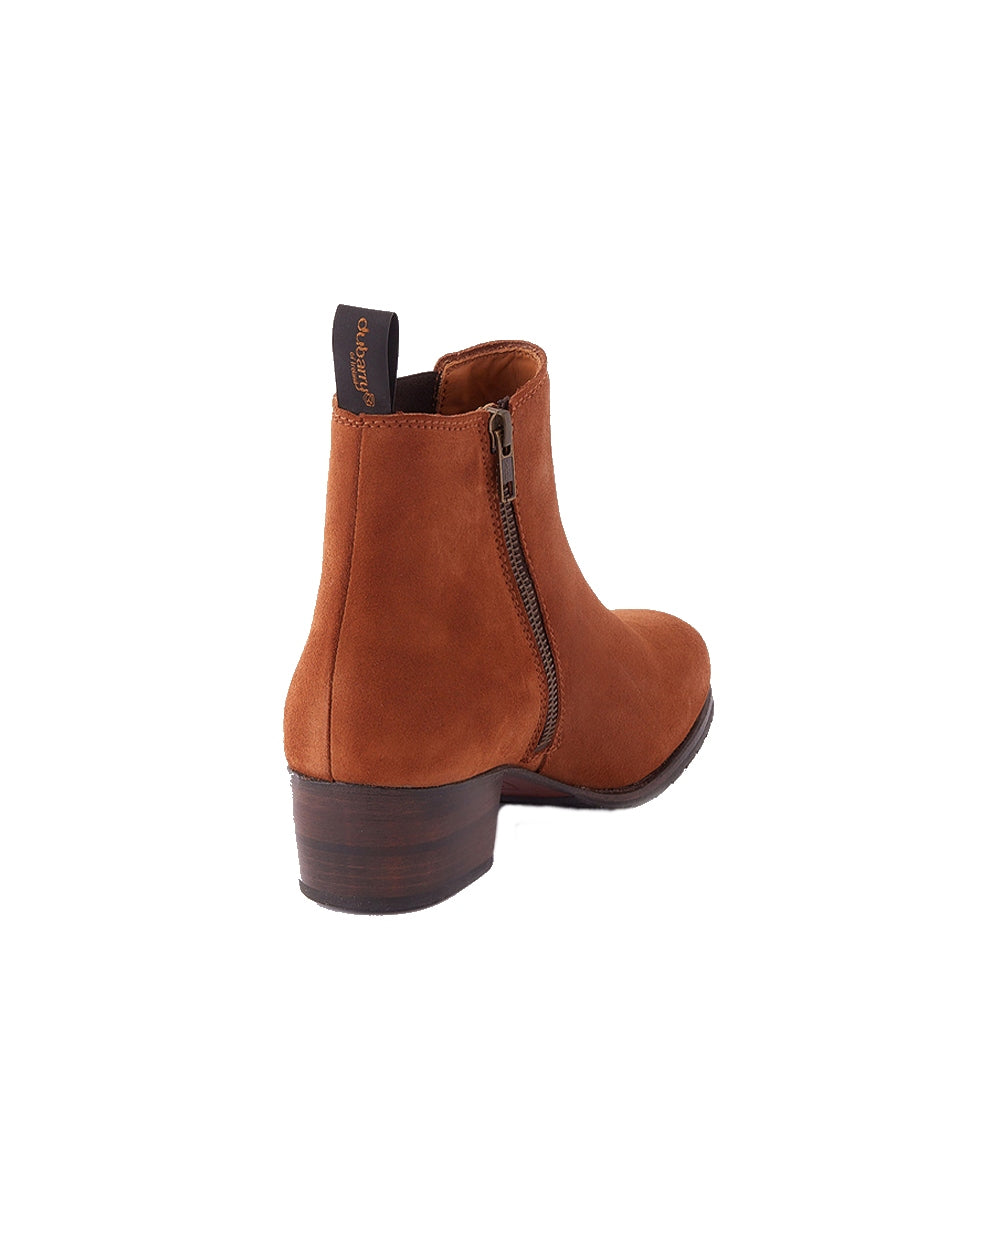 Dubarry Bray Chelsea Boots in Camel 